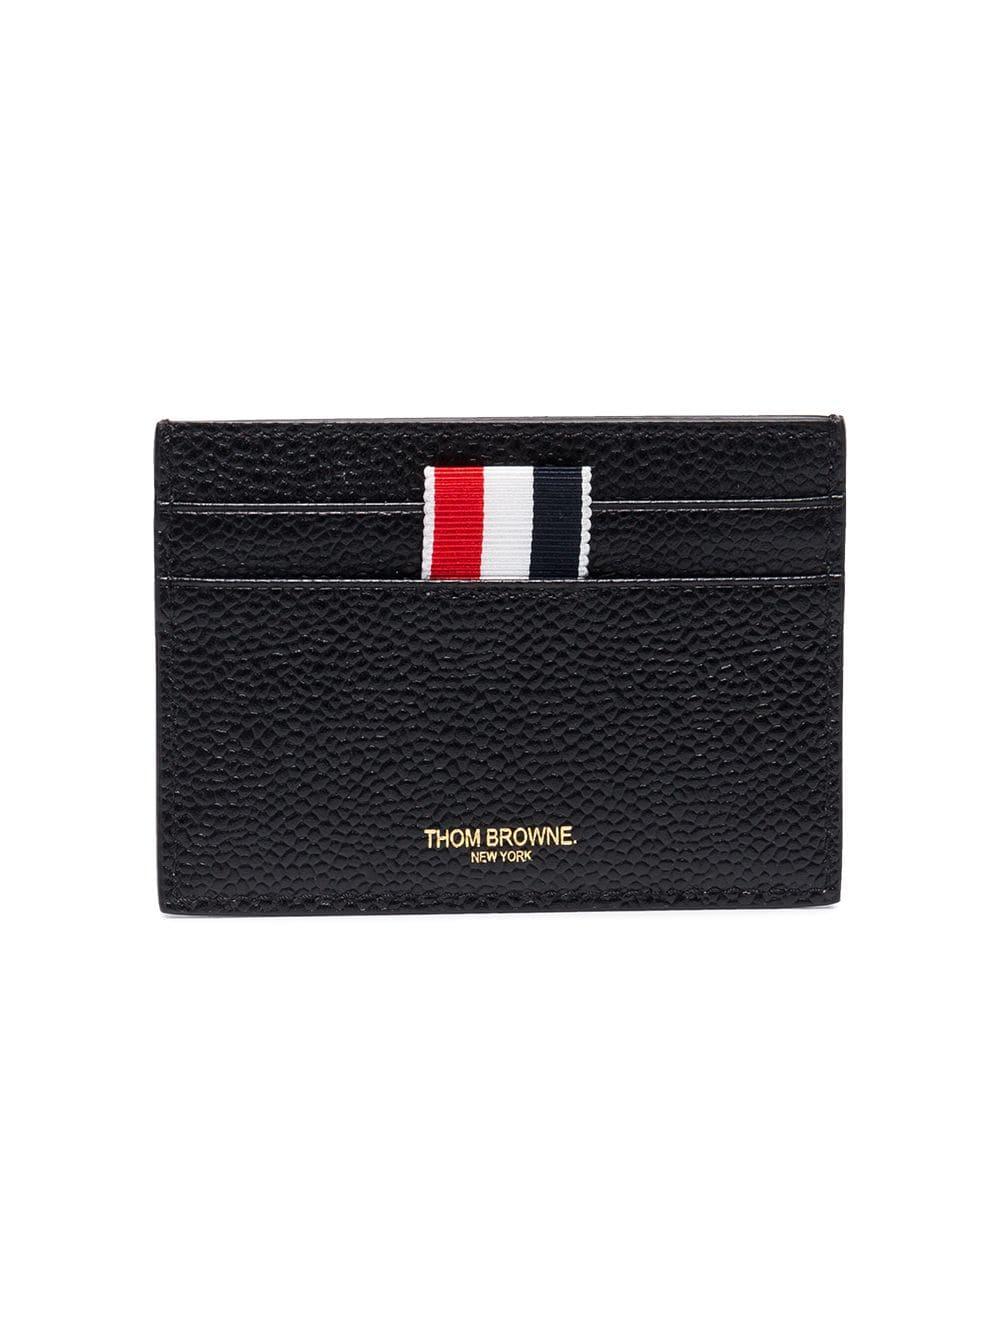 Thom Browne Leather Single Card Holder in Black for Men - Lyst